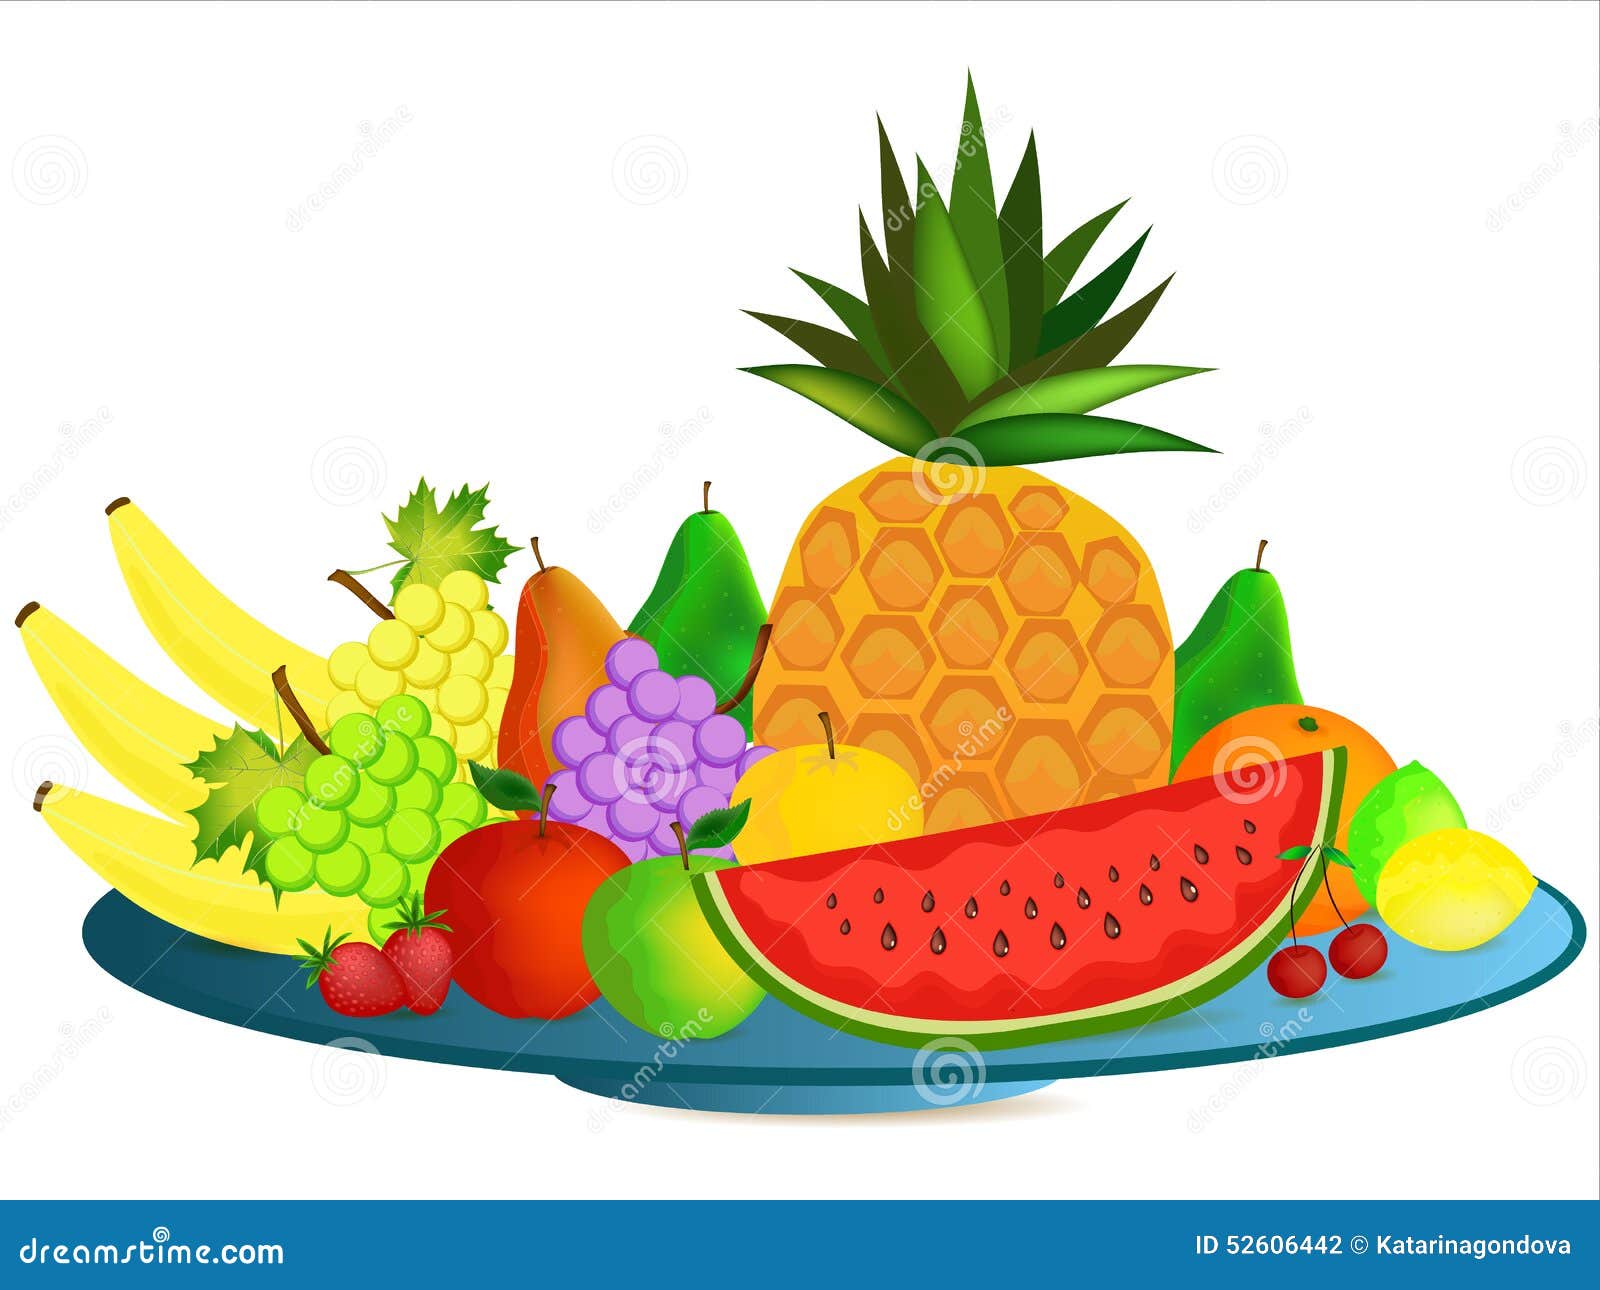 Plate with cartoon fruit stock vector. Image of vitamin - 52606442